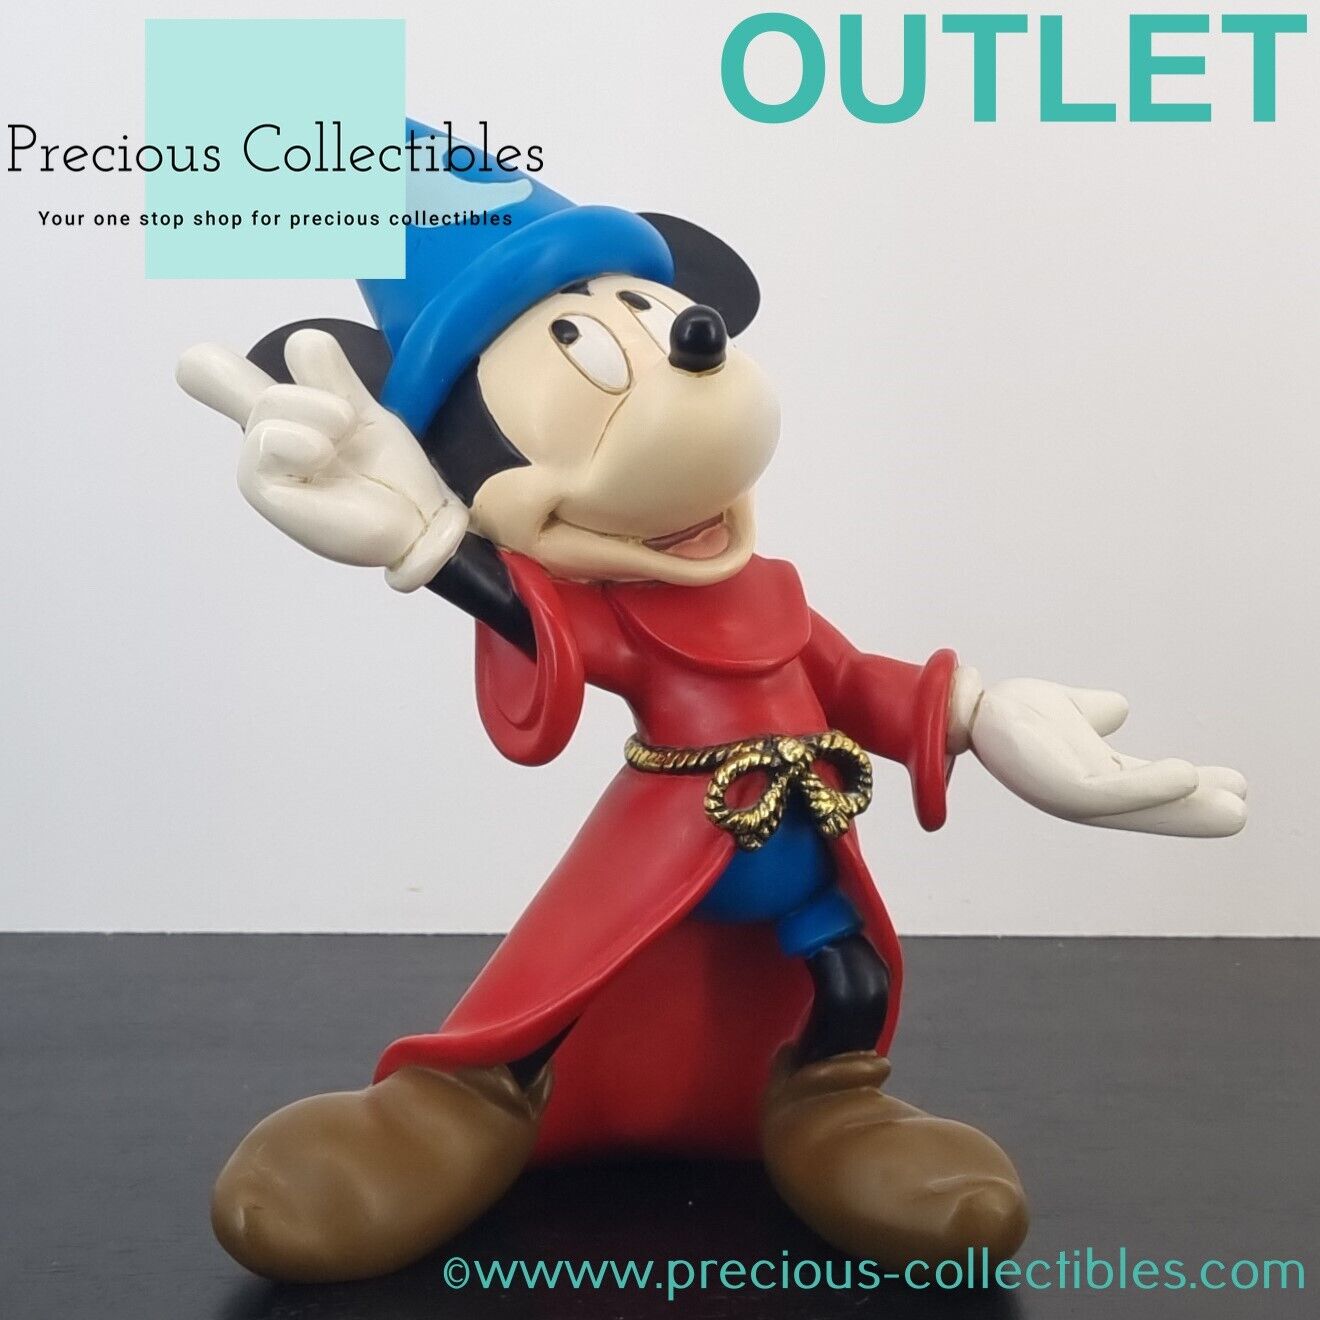 Extremely rare Mickey Mouse Fantasia statue - Rutten - Peter Mook